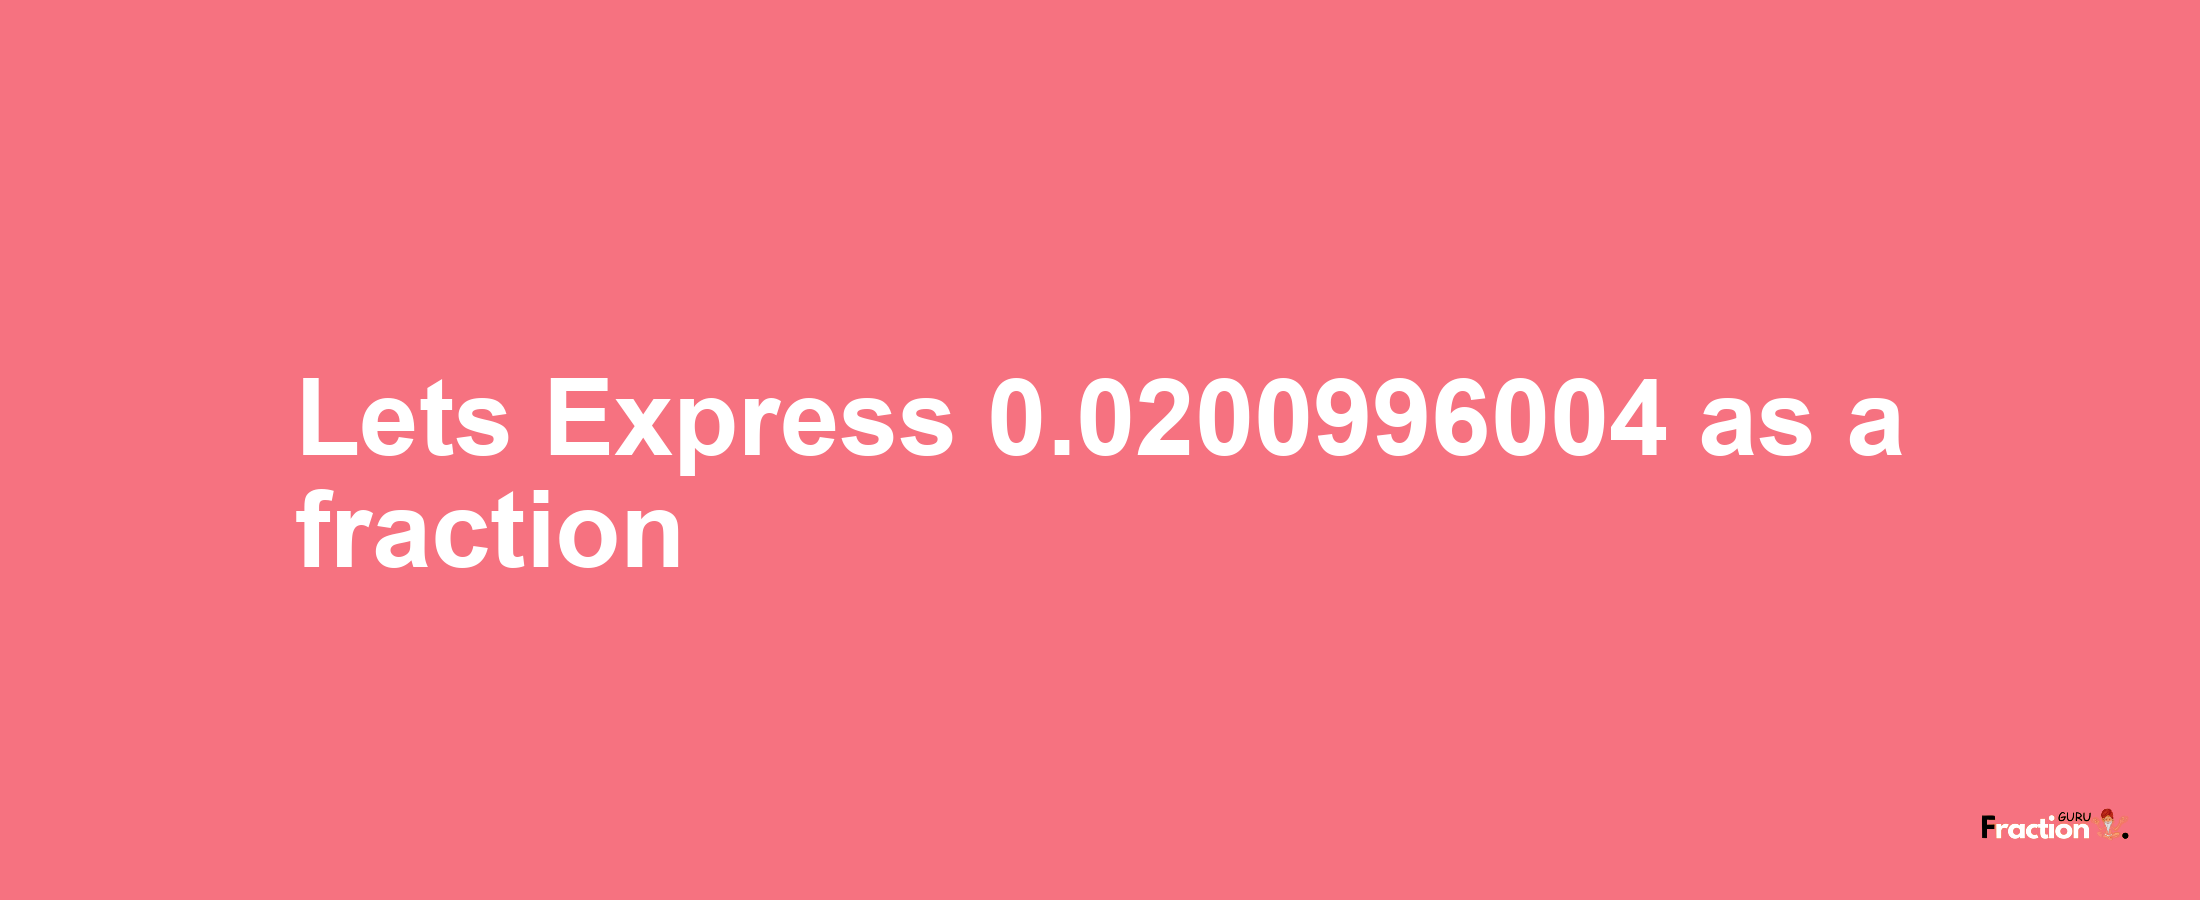 Lets Express 0.0200996004 as afraction